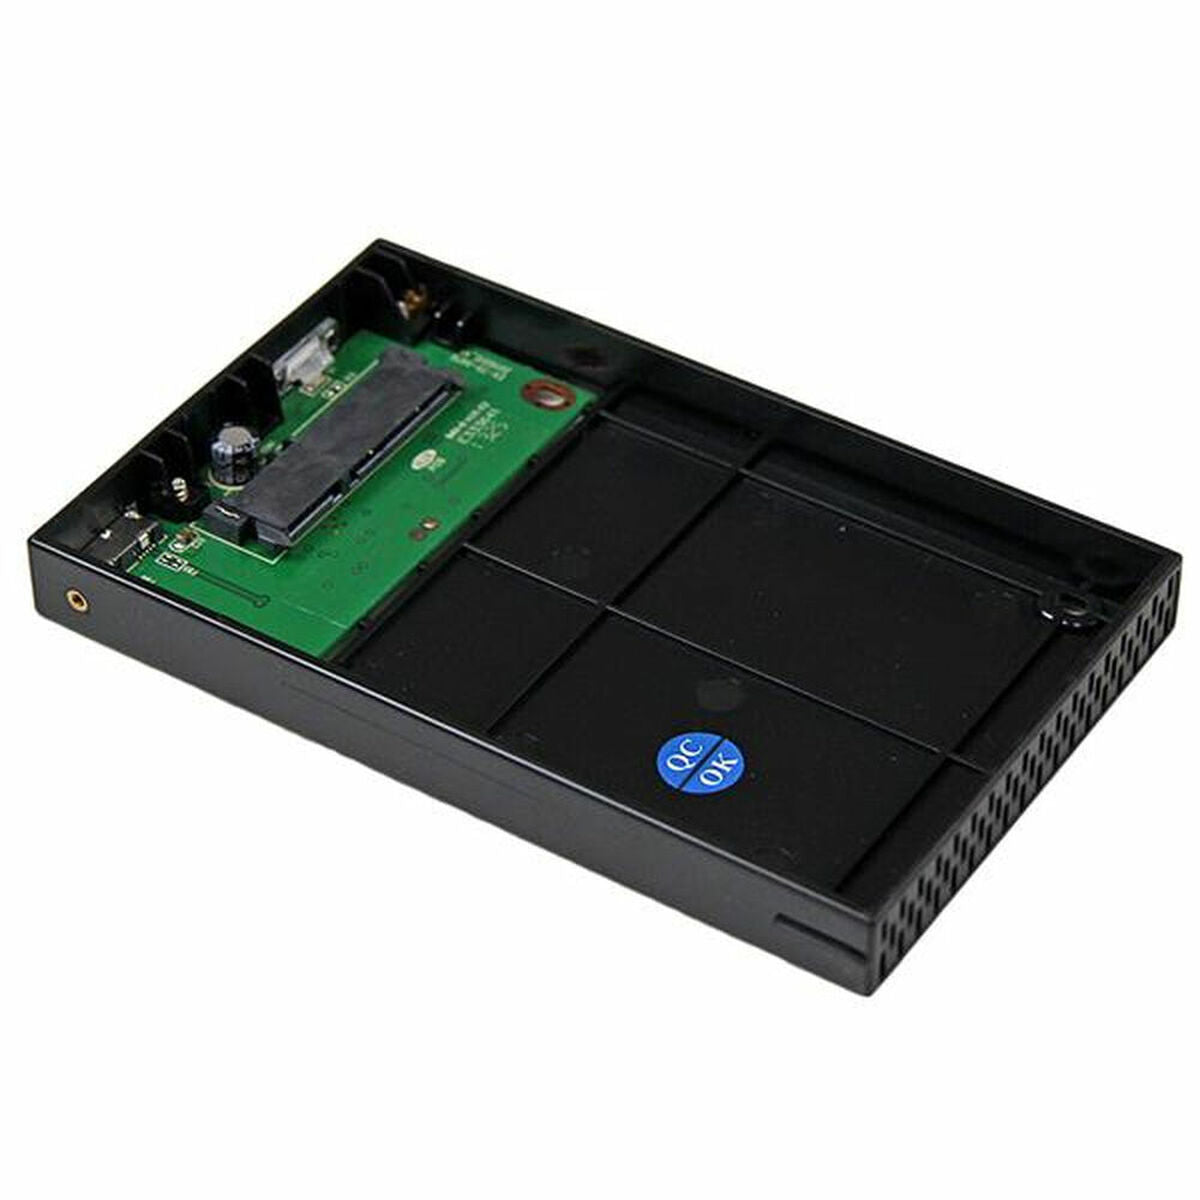 Housing for Hard Disk Startech S2510BMU33 2.5", Startech, Computing, Accessories, housing-for-hard-disk-startech-s2510bmu33-2-5, Brand_Startech, category-reference-2609, category-reference-2803, category-reference-2806, category-reference-t-19685, category-reference-t-19908, category-reference-t-21344, Condition_NEW, Price_20 - 50, Teleworking, RiotNook